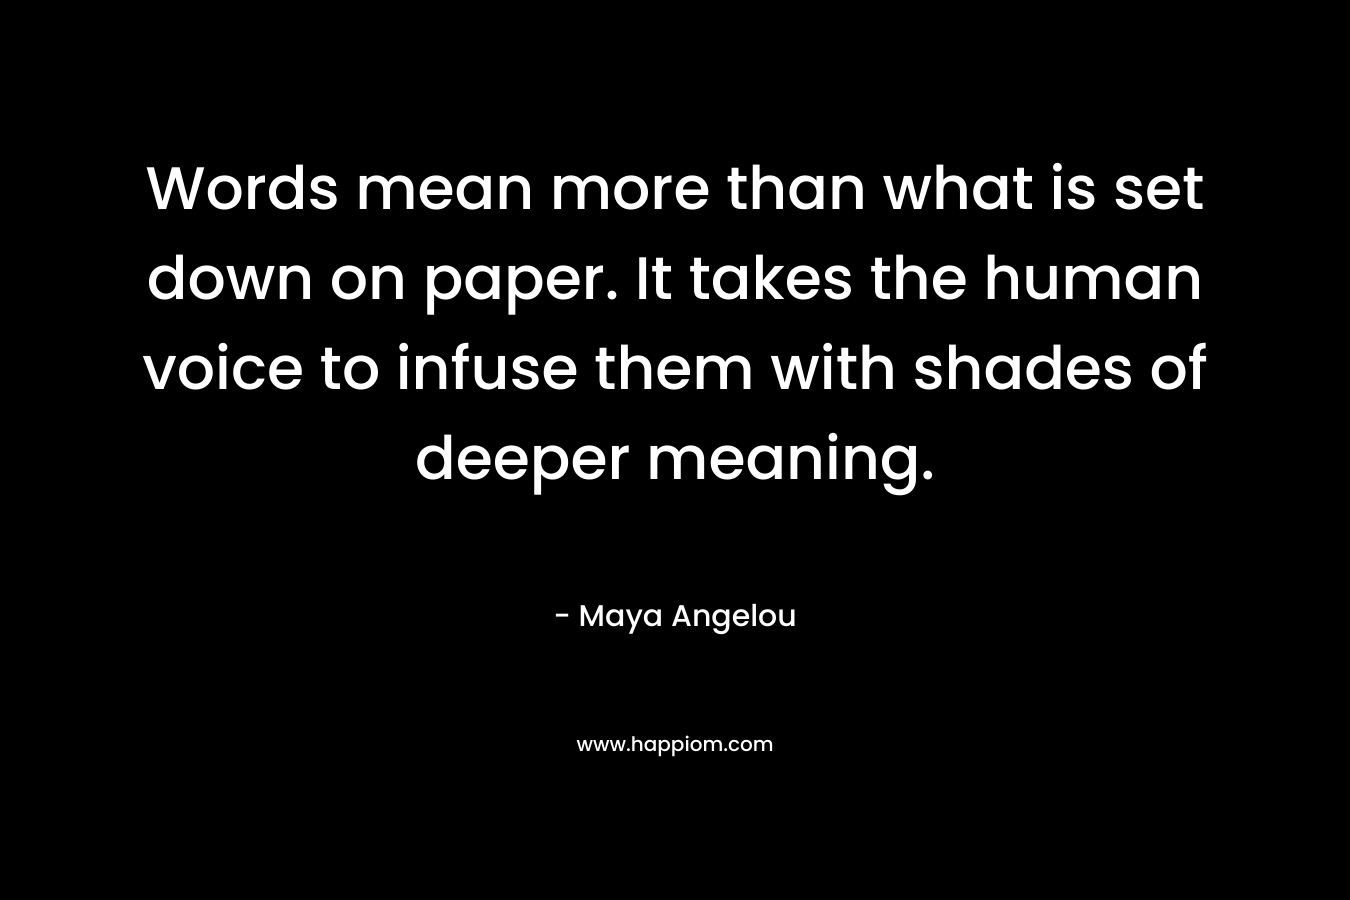 Words mean more than what is set down on paper. It takes the human voice to infuse them with shades of deeper meaning. – Maya Angelou